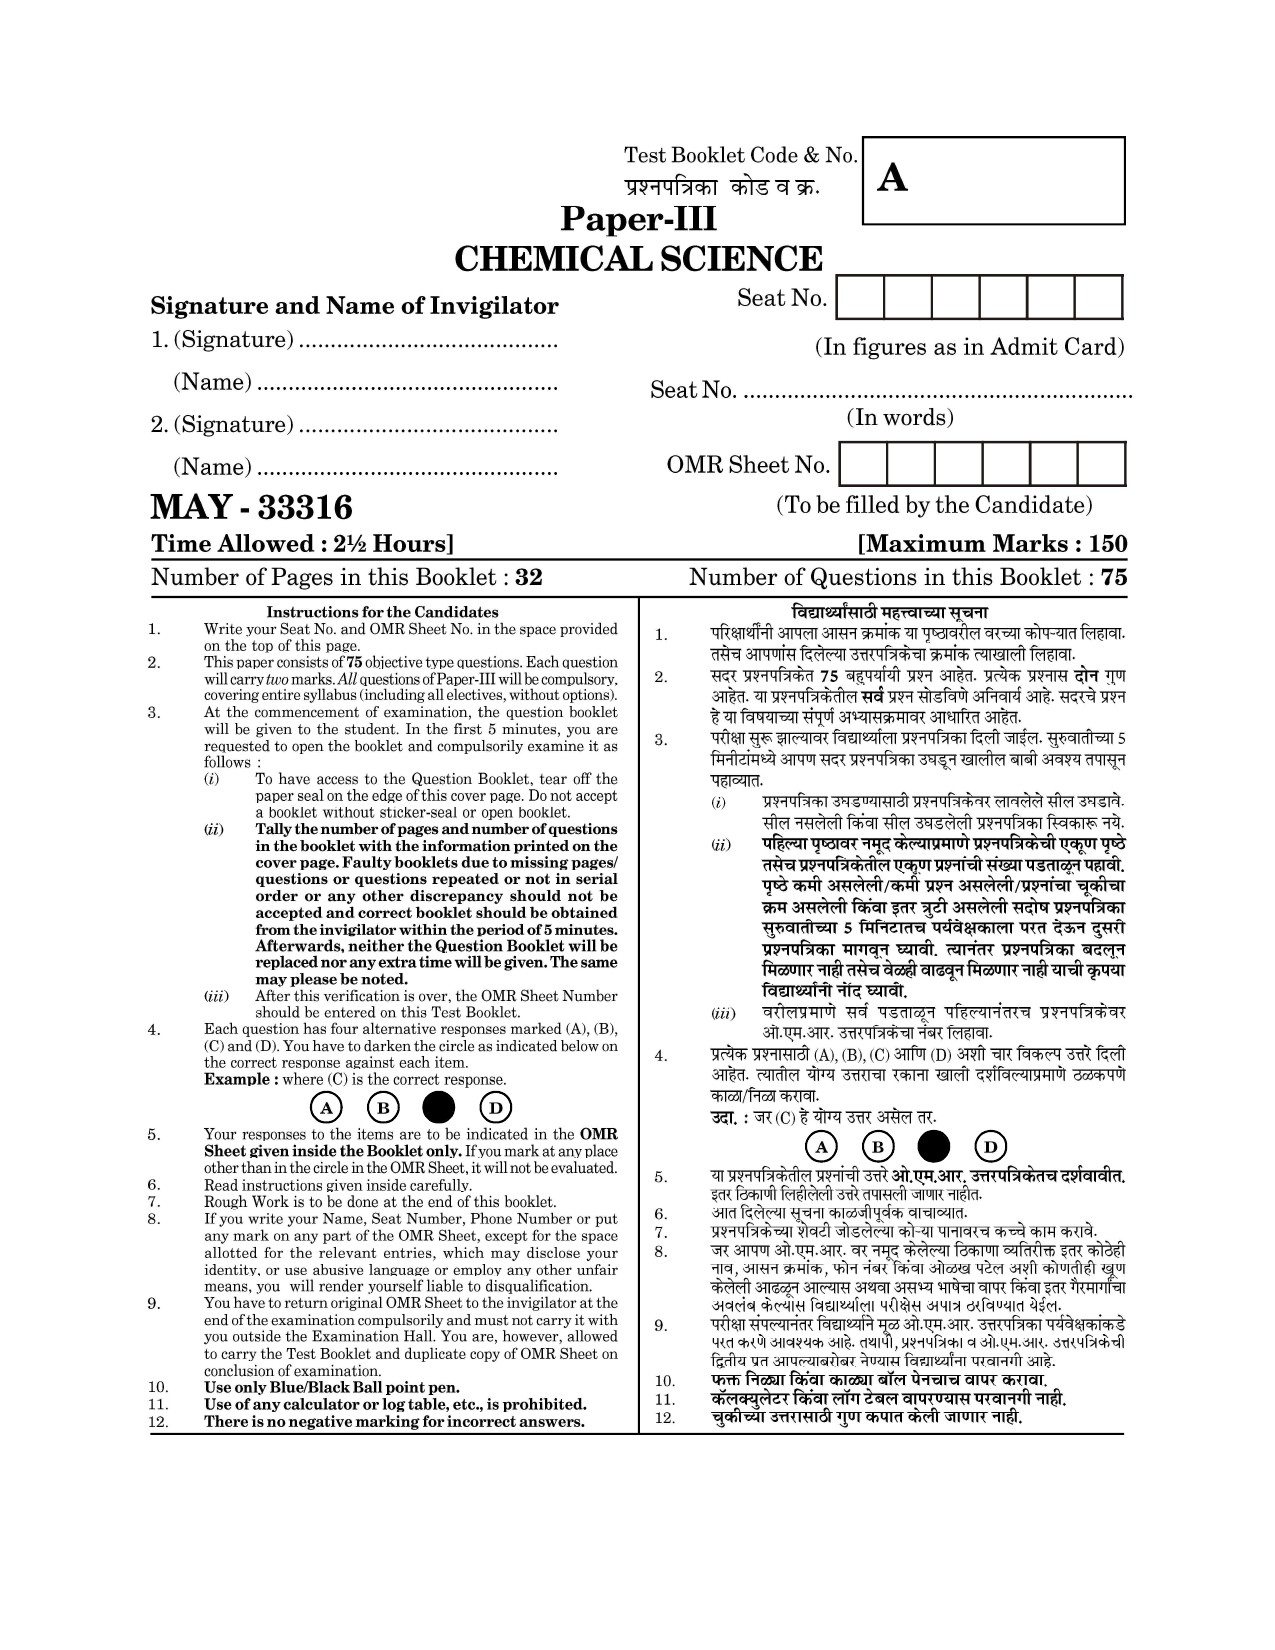 Maharashtra SET Chemical Sciences Question Paper III May 2016 1